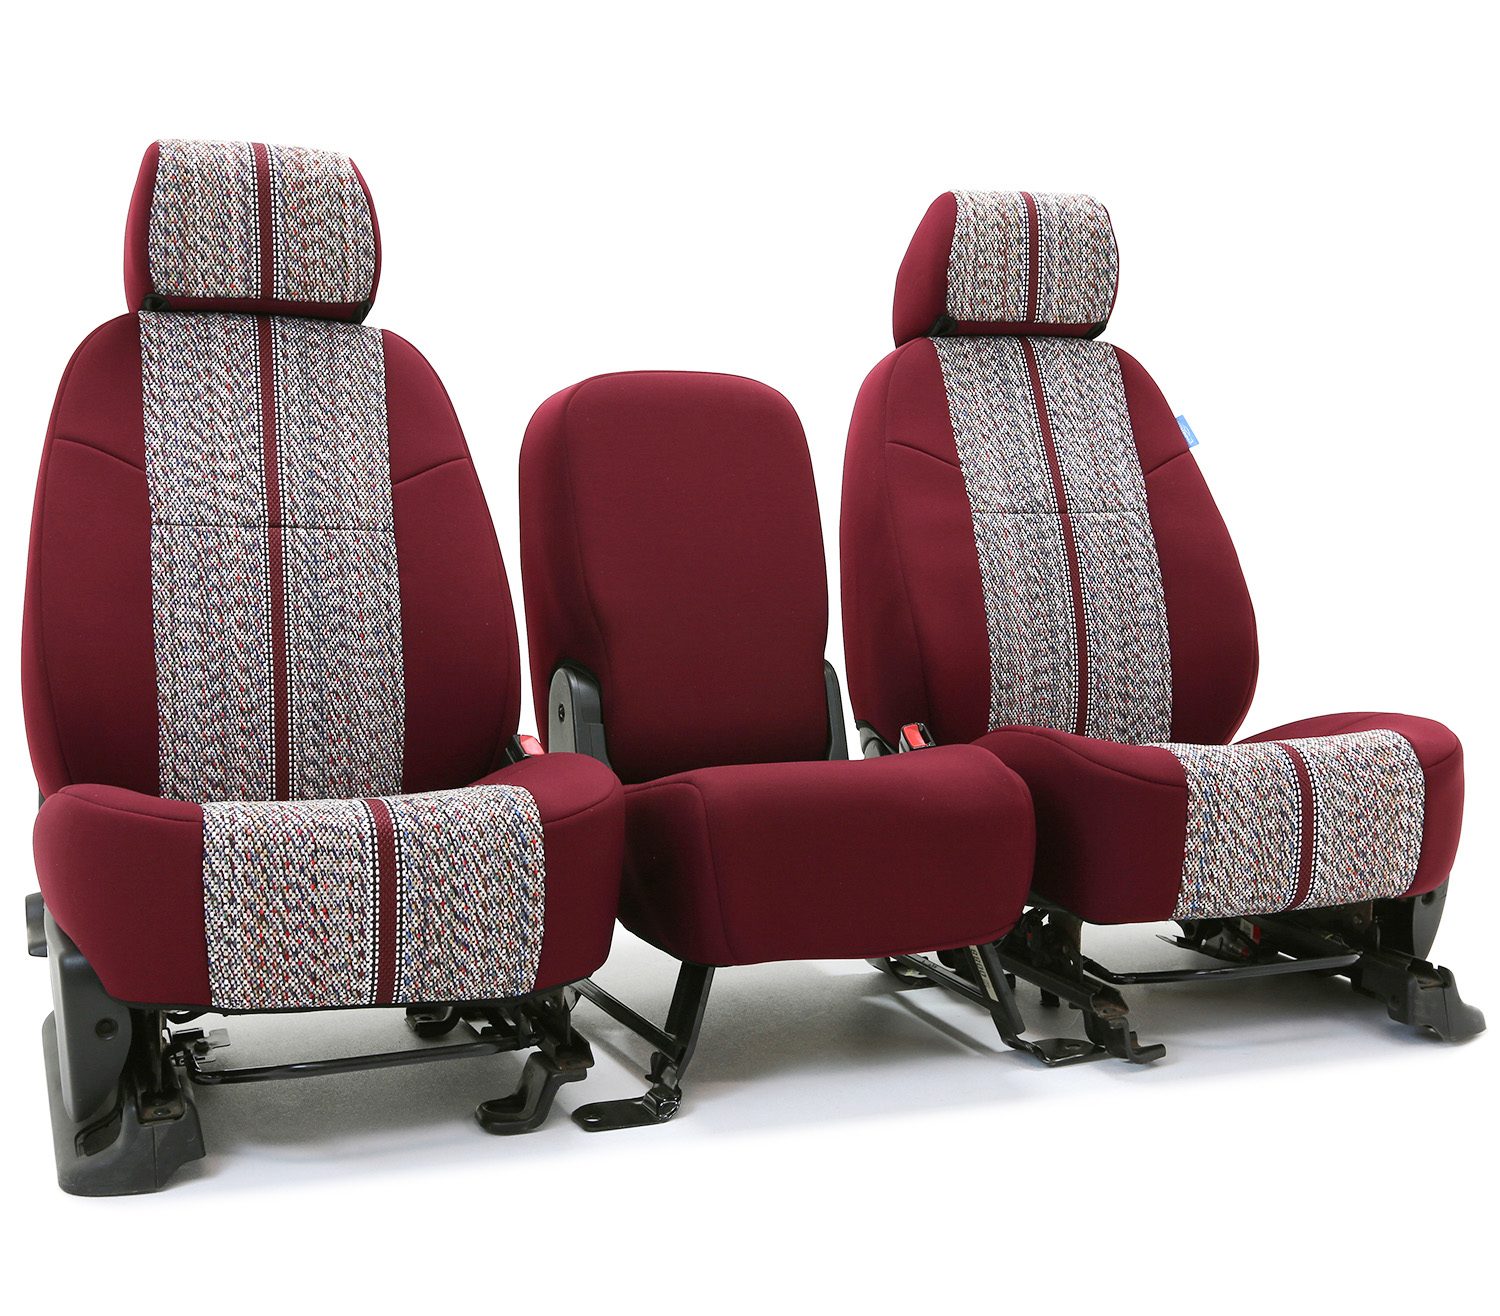 https://cdn.carcoverplanet.com/22/seat-covers/saddleblanket/saddleblanket-wine-seat-covers.jpg